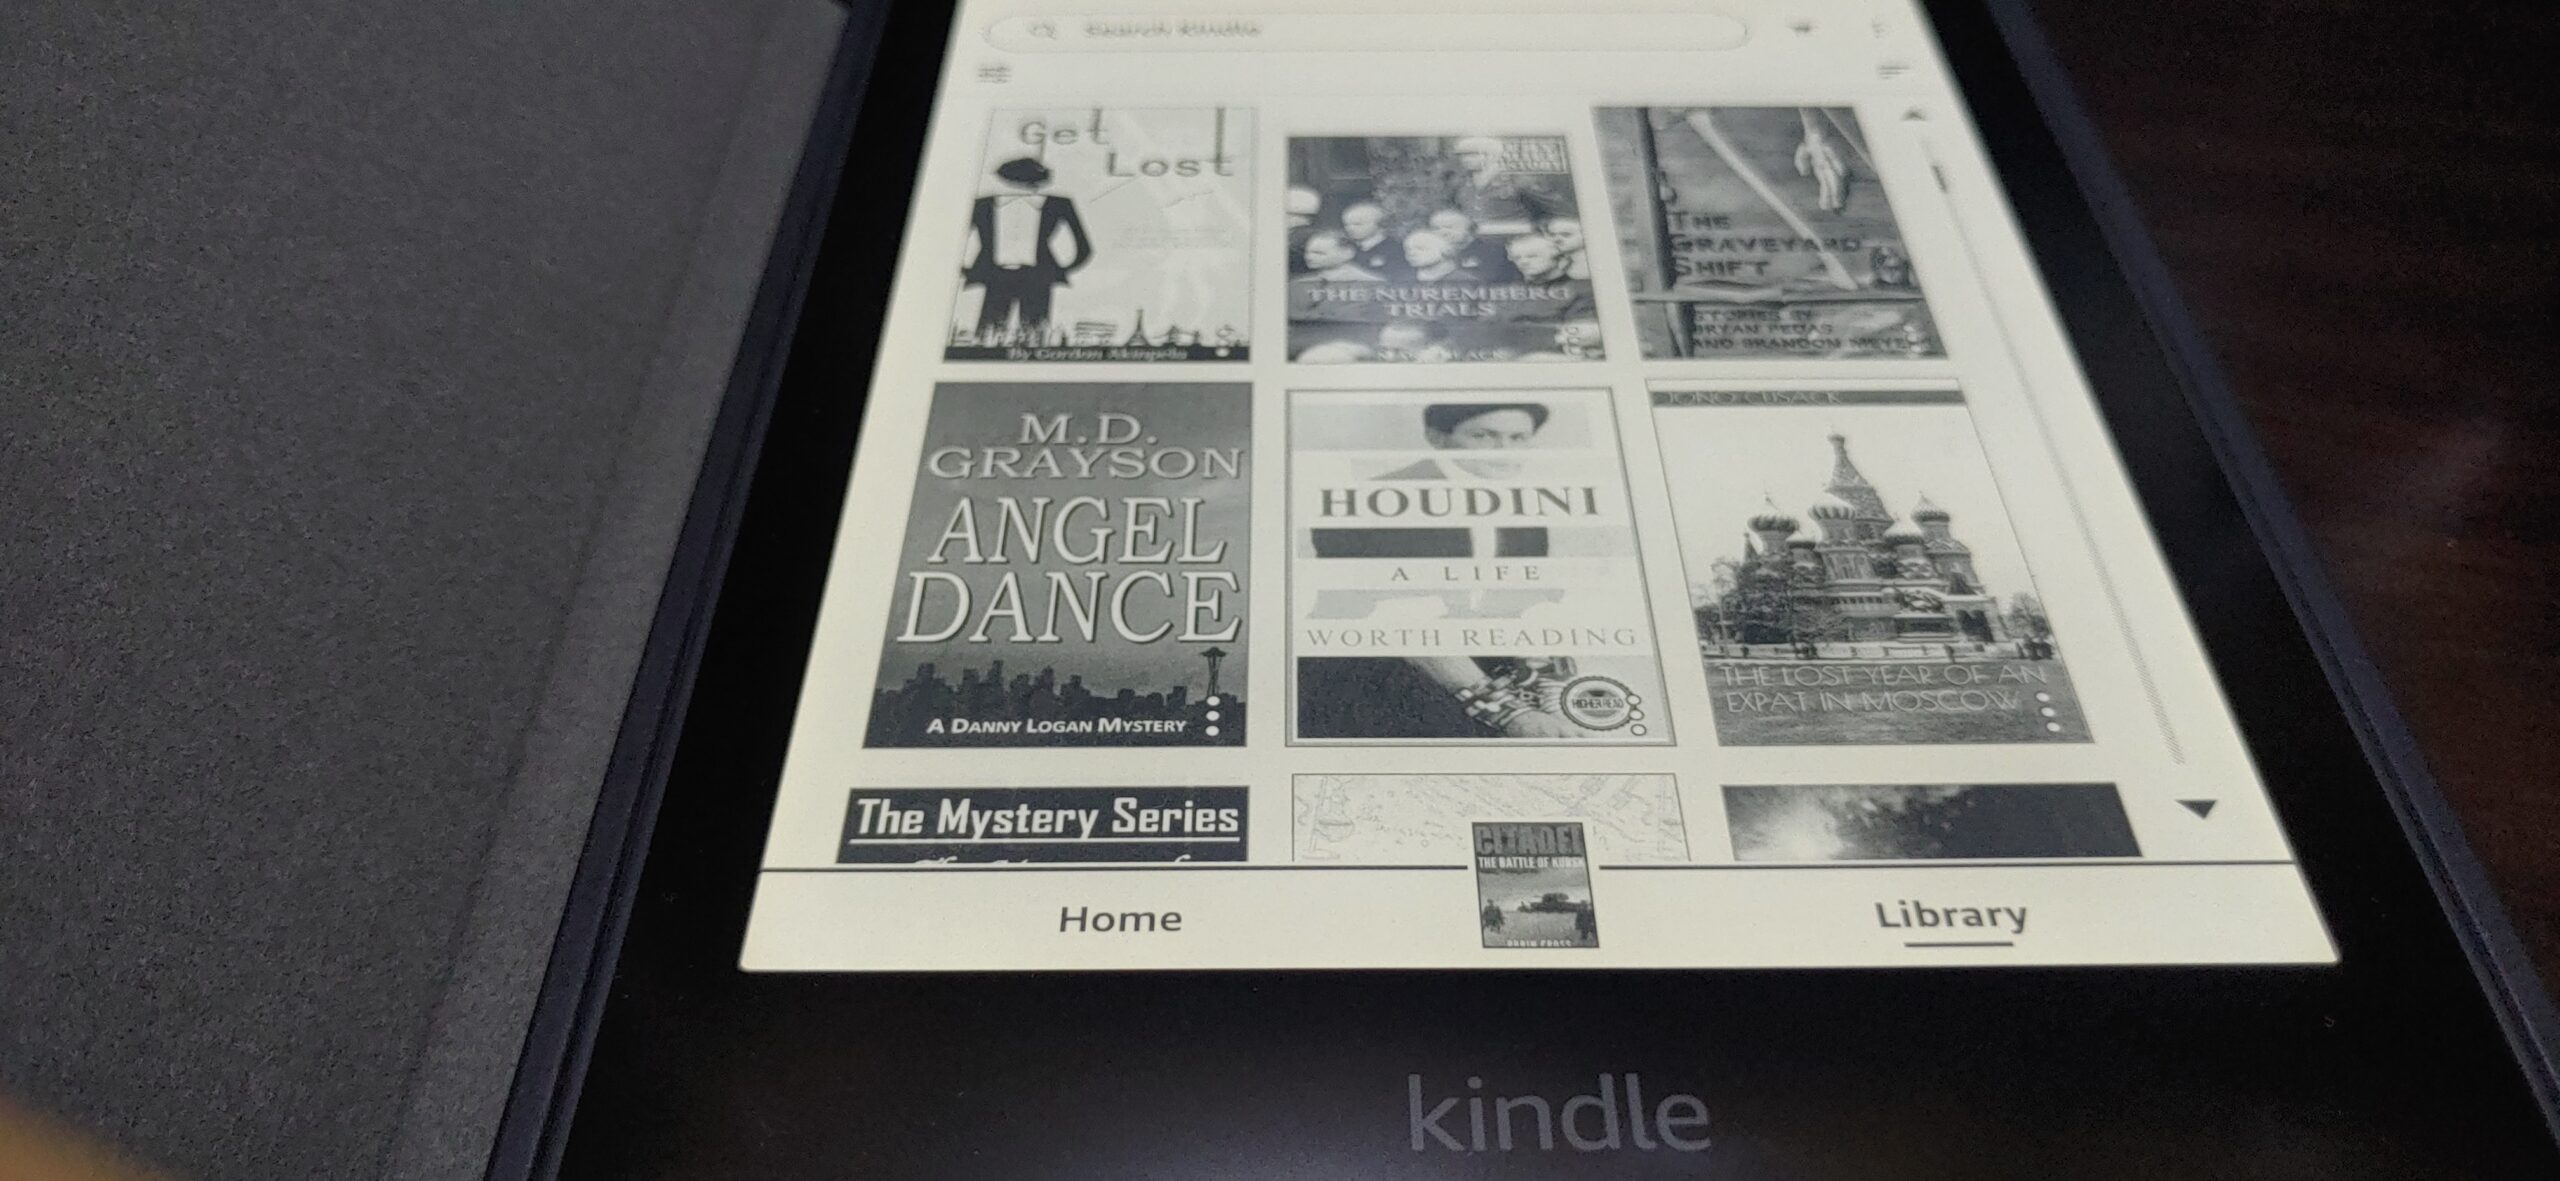 Here is how you remove an e-book from your Kindle - Good e-Reader